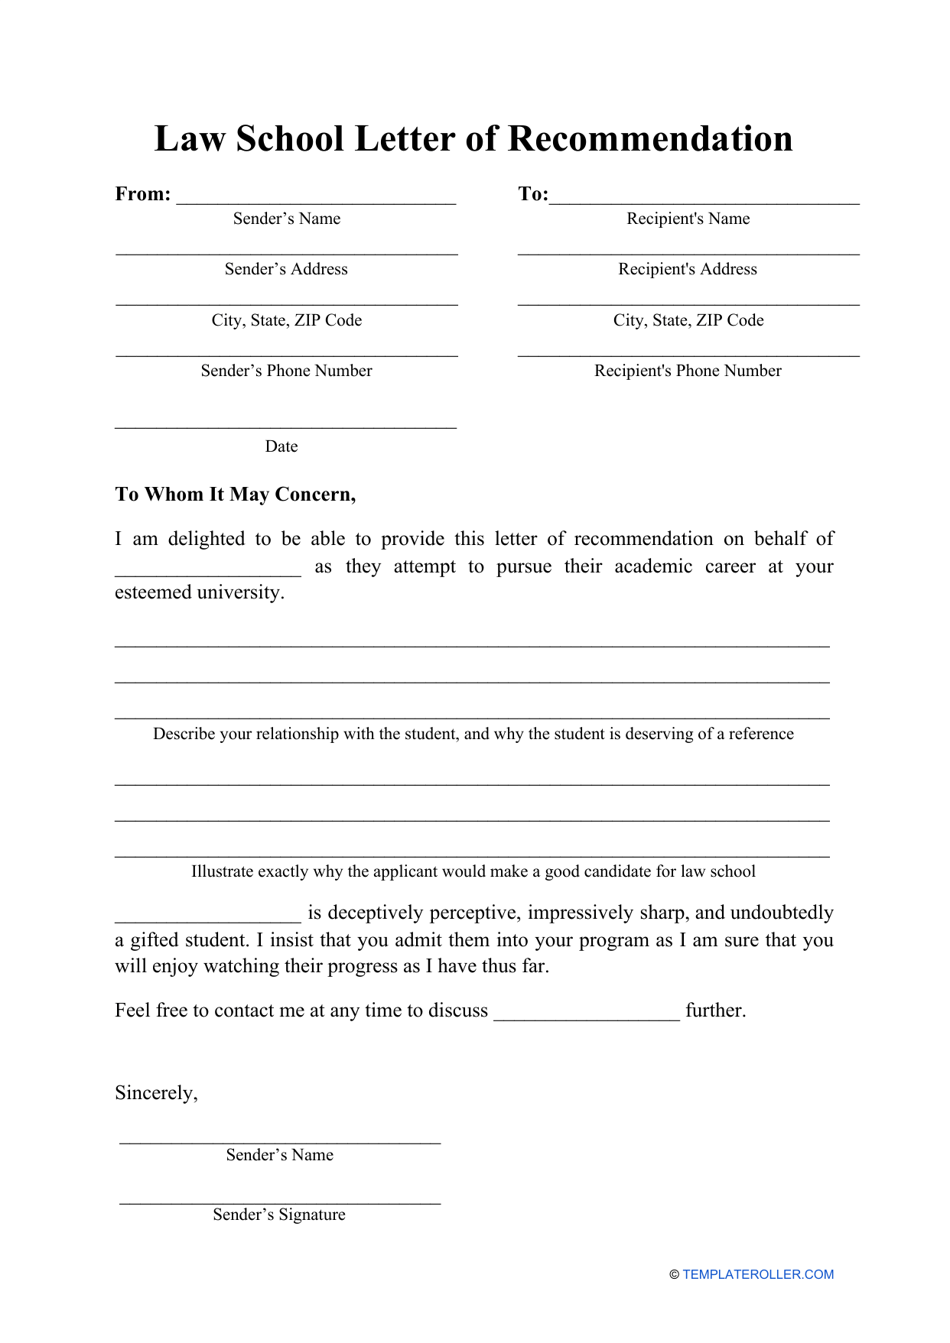 Law School Letter of Recommendation Template Download Printable